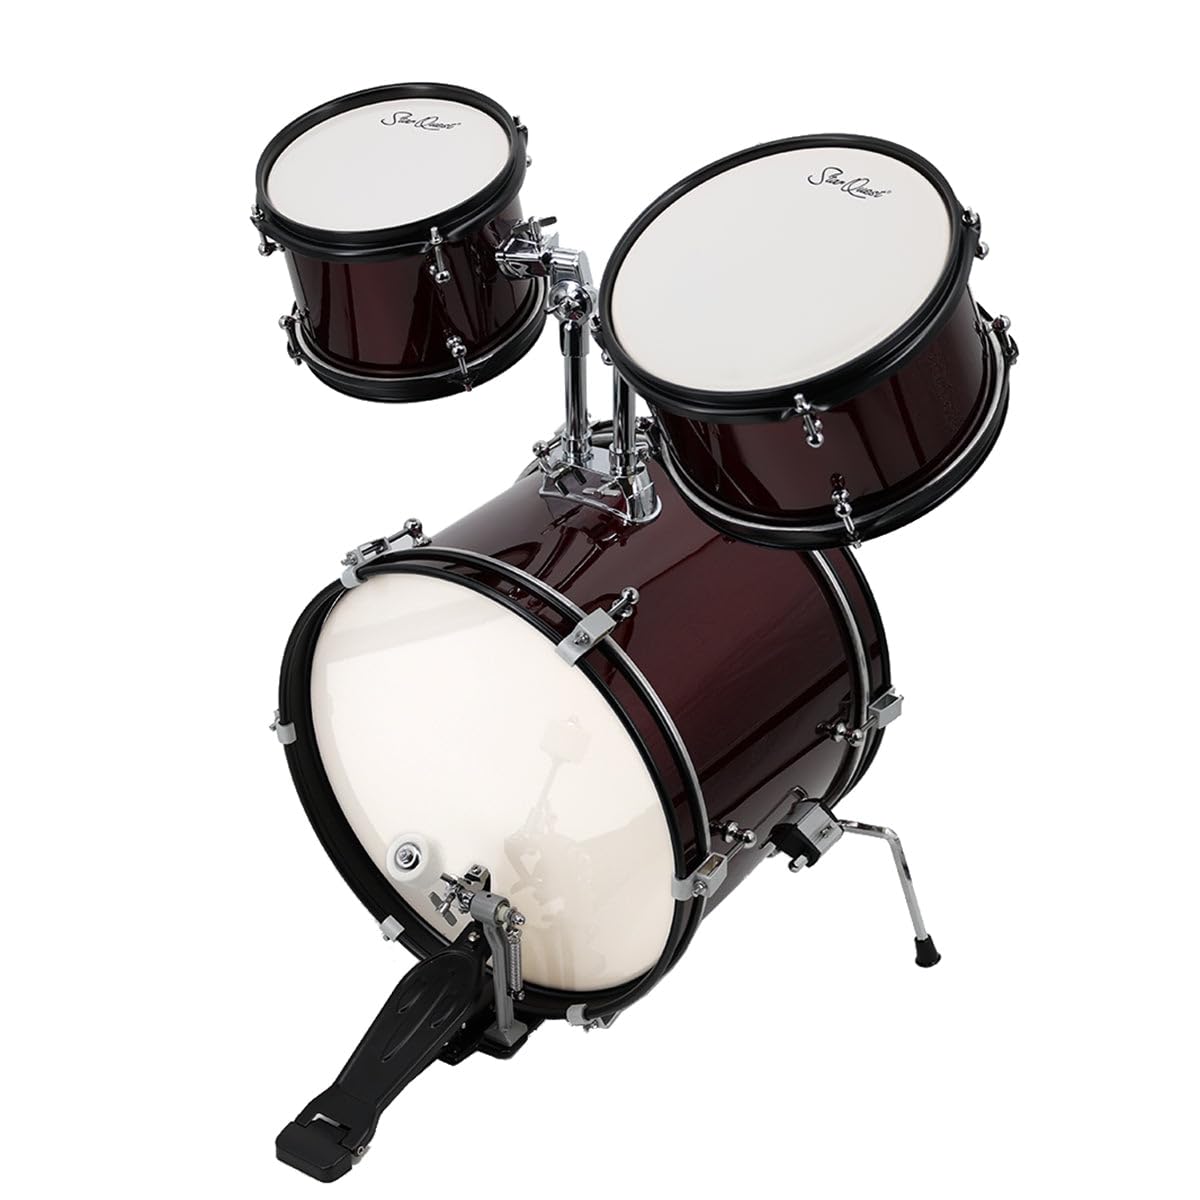 StarQuest SQ-DS-JR5-MWR Junior 5-Piece Drum Set – Metallic Wine Red Finish – Perfect for Young Drummers and Beginners, High Quality